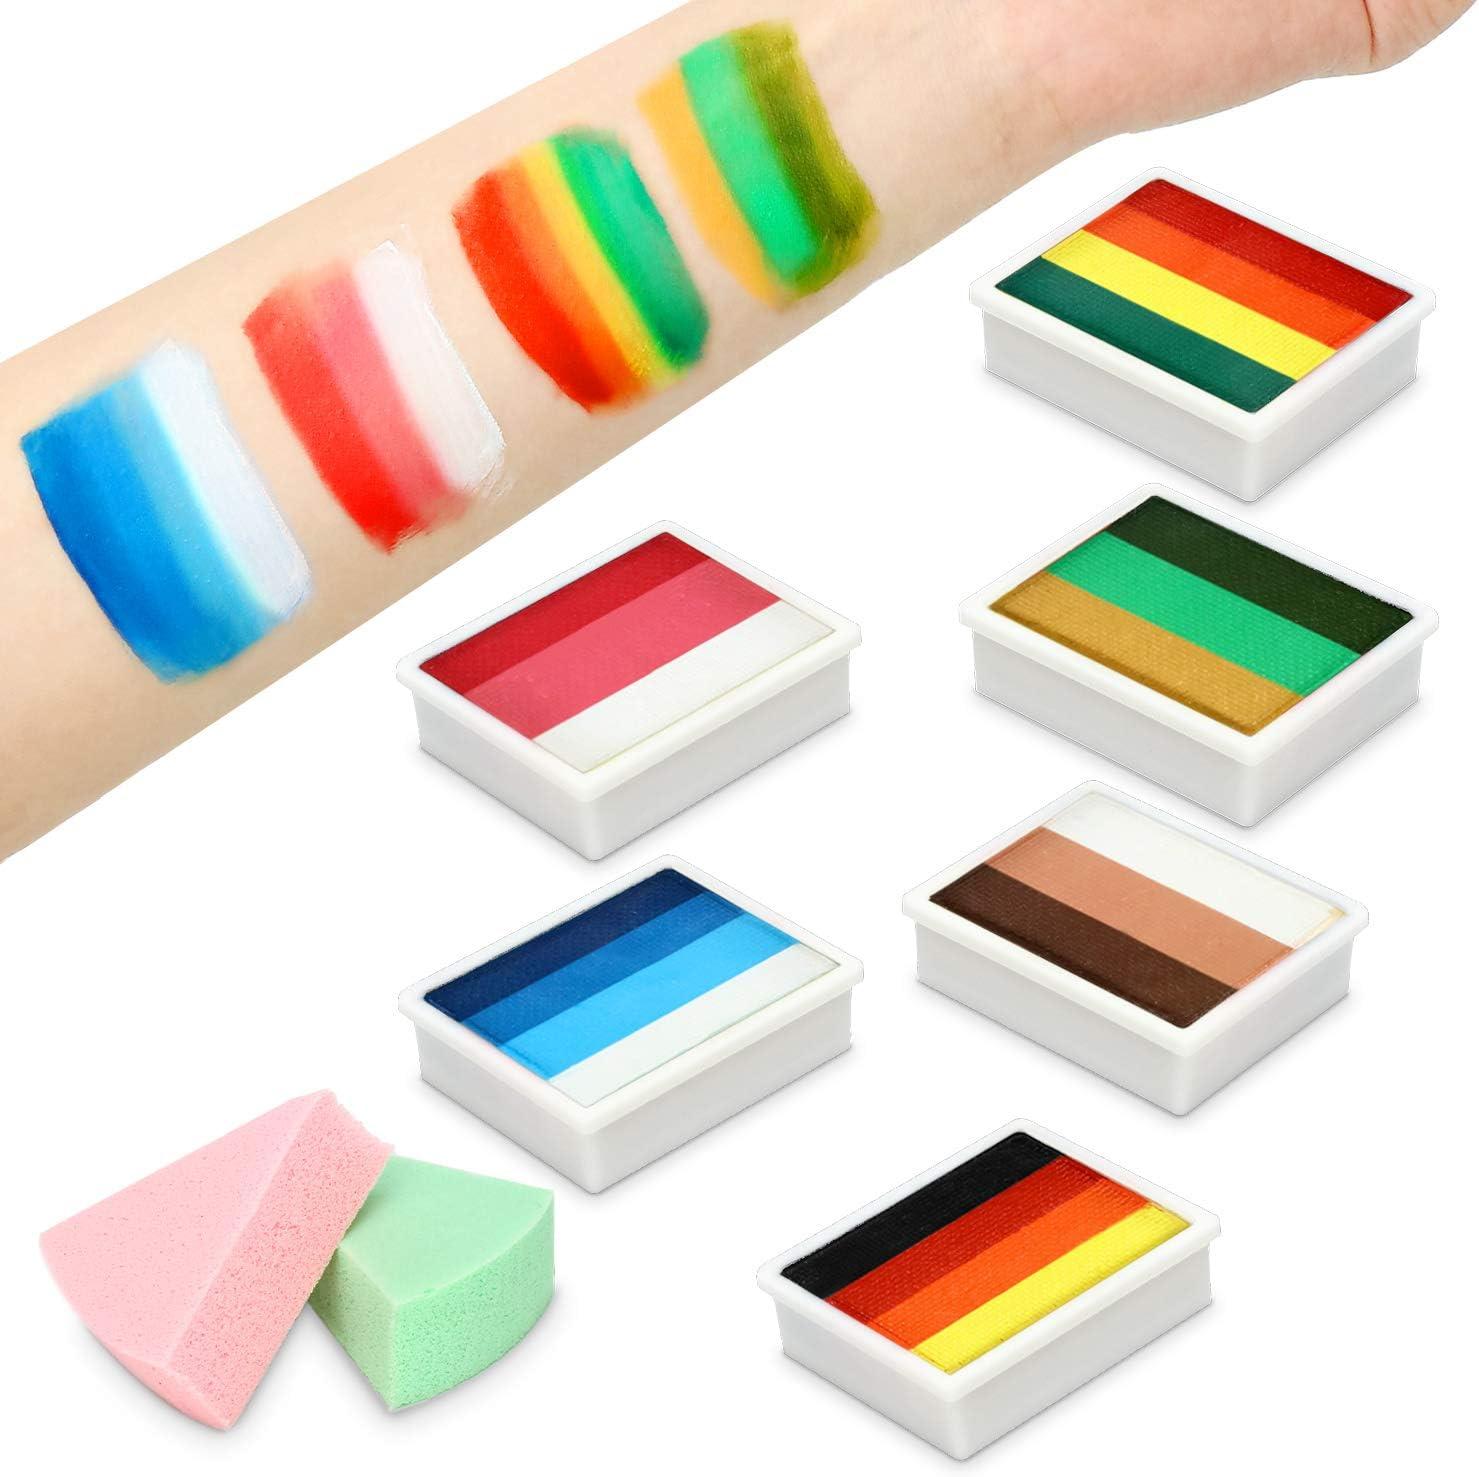 Maydear Face Painting Kit for Kids & Adults with 6 Colors Split Cake  Palette, 2 Brushes, Safe & Non-Toxic Water Based Makeup Face Paint Kit